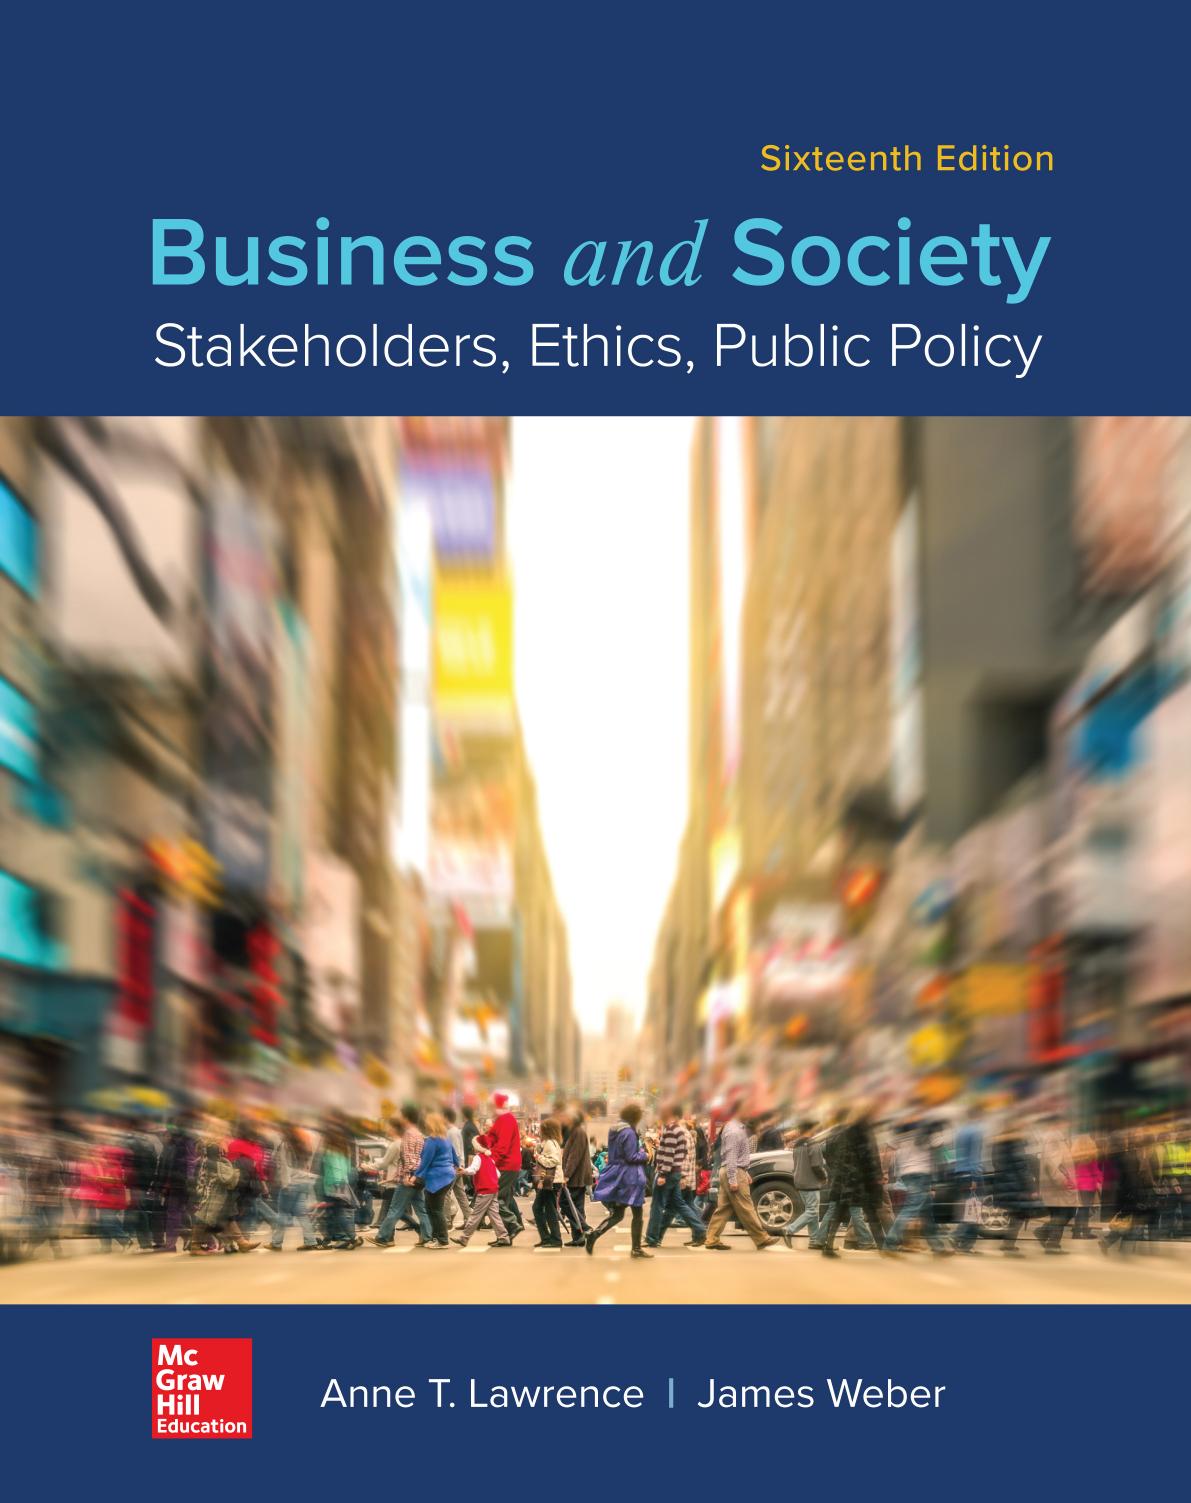 Business and society  stakeholders, ethics, public policy by Anne T. Lawrence (Business ethics professor) James Weber 16th ed 2020